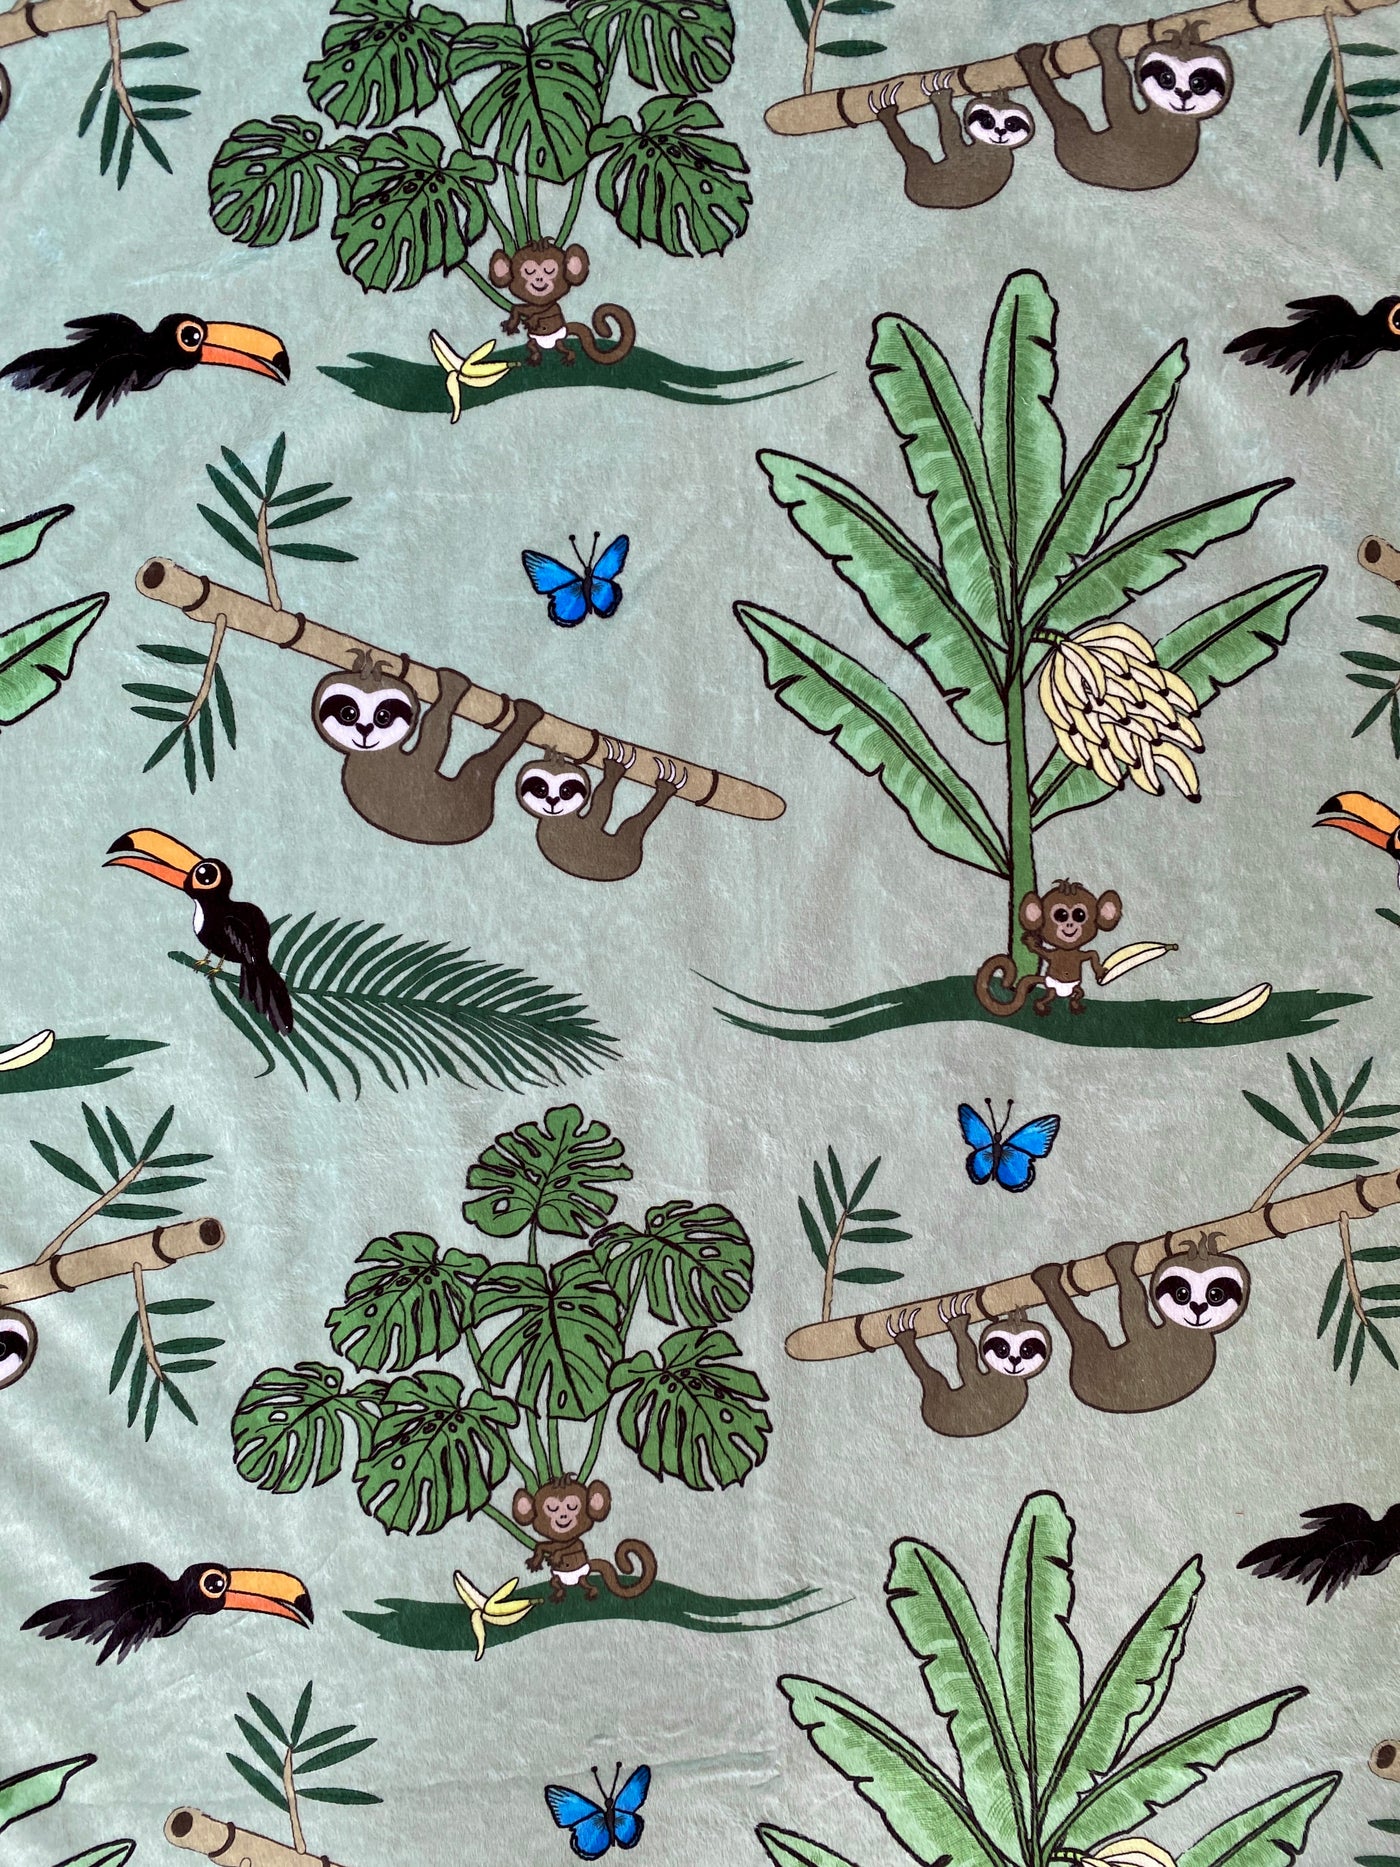 Giant blanket: Sloths in the Jungle